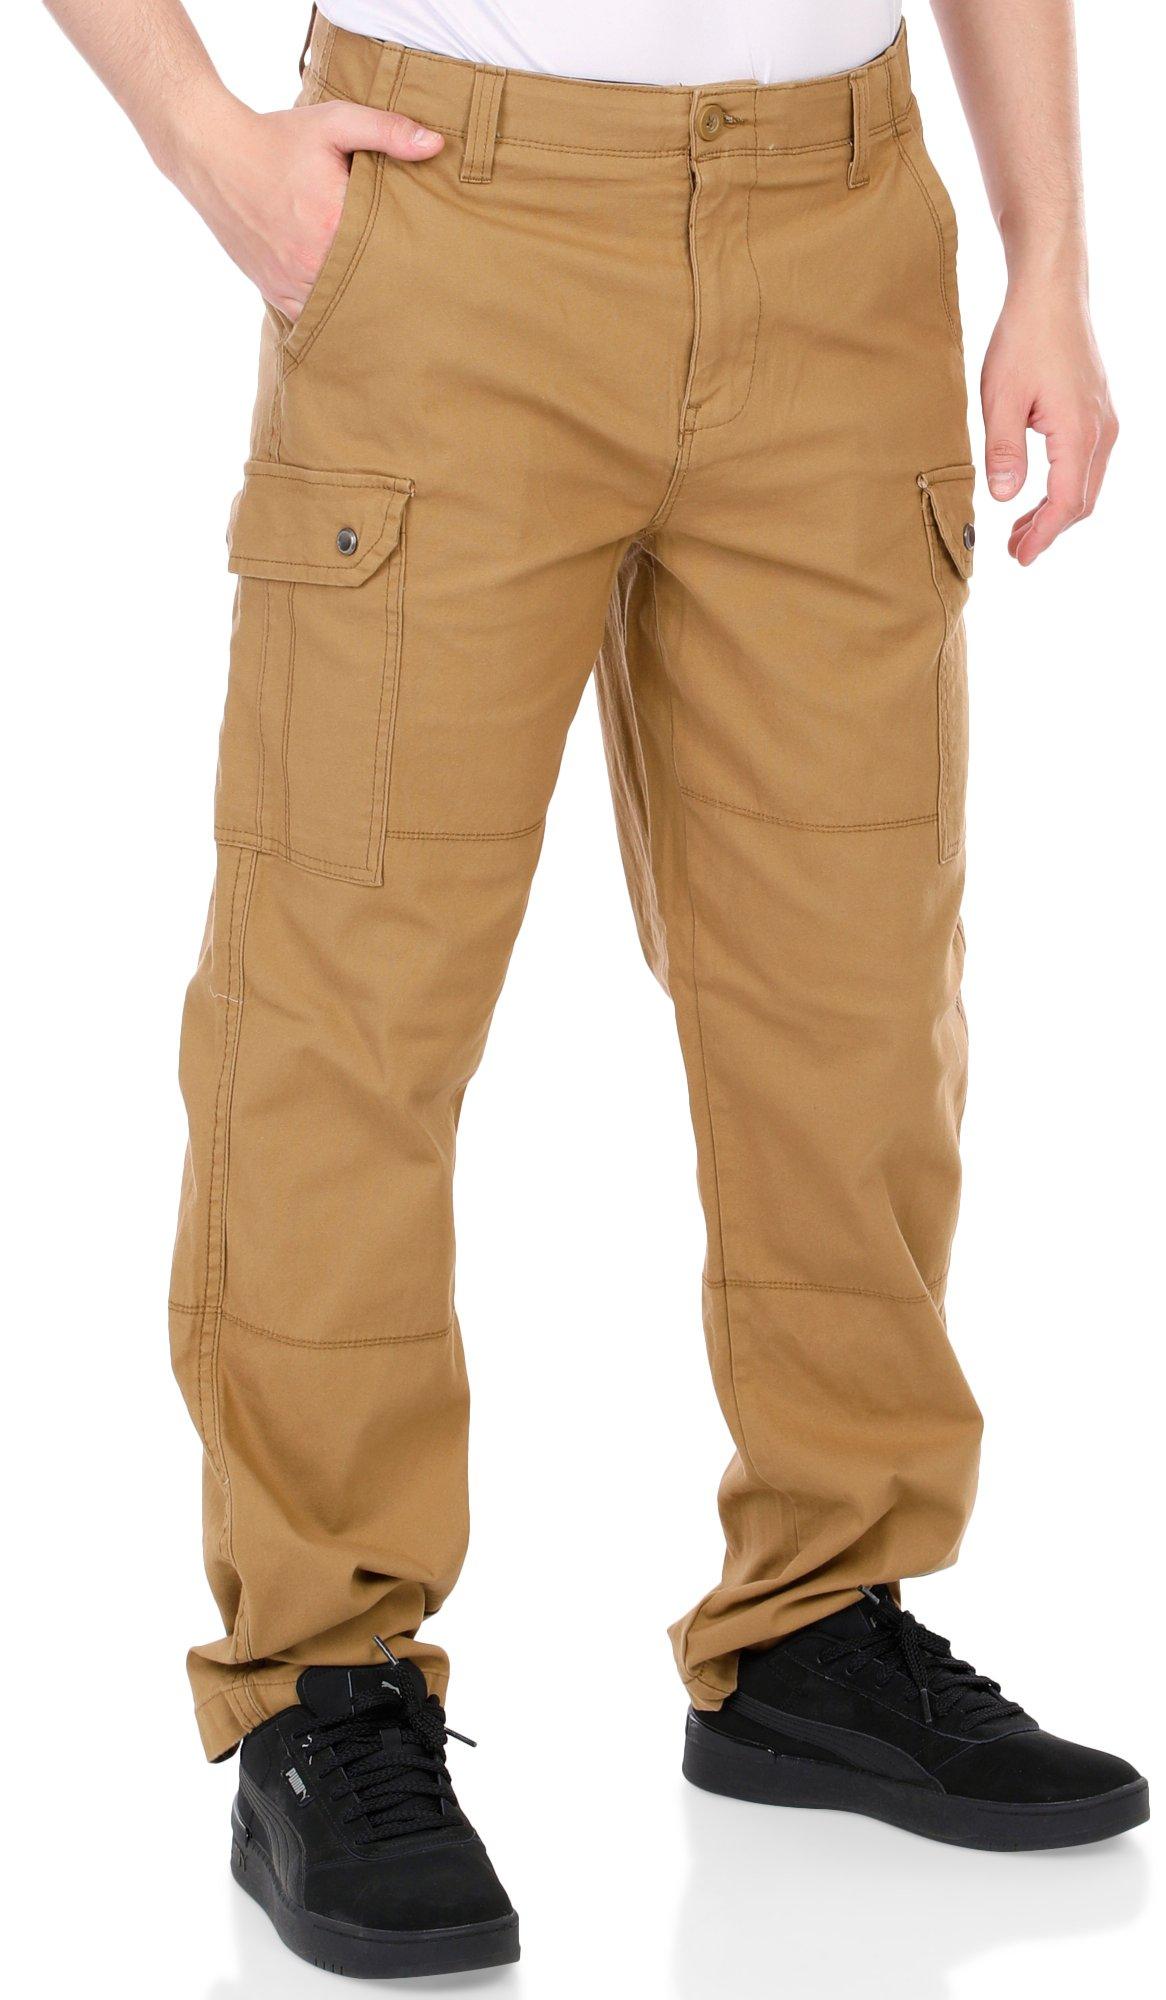 Men's Relaxed Fit Cargo Pants